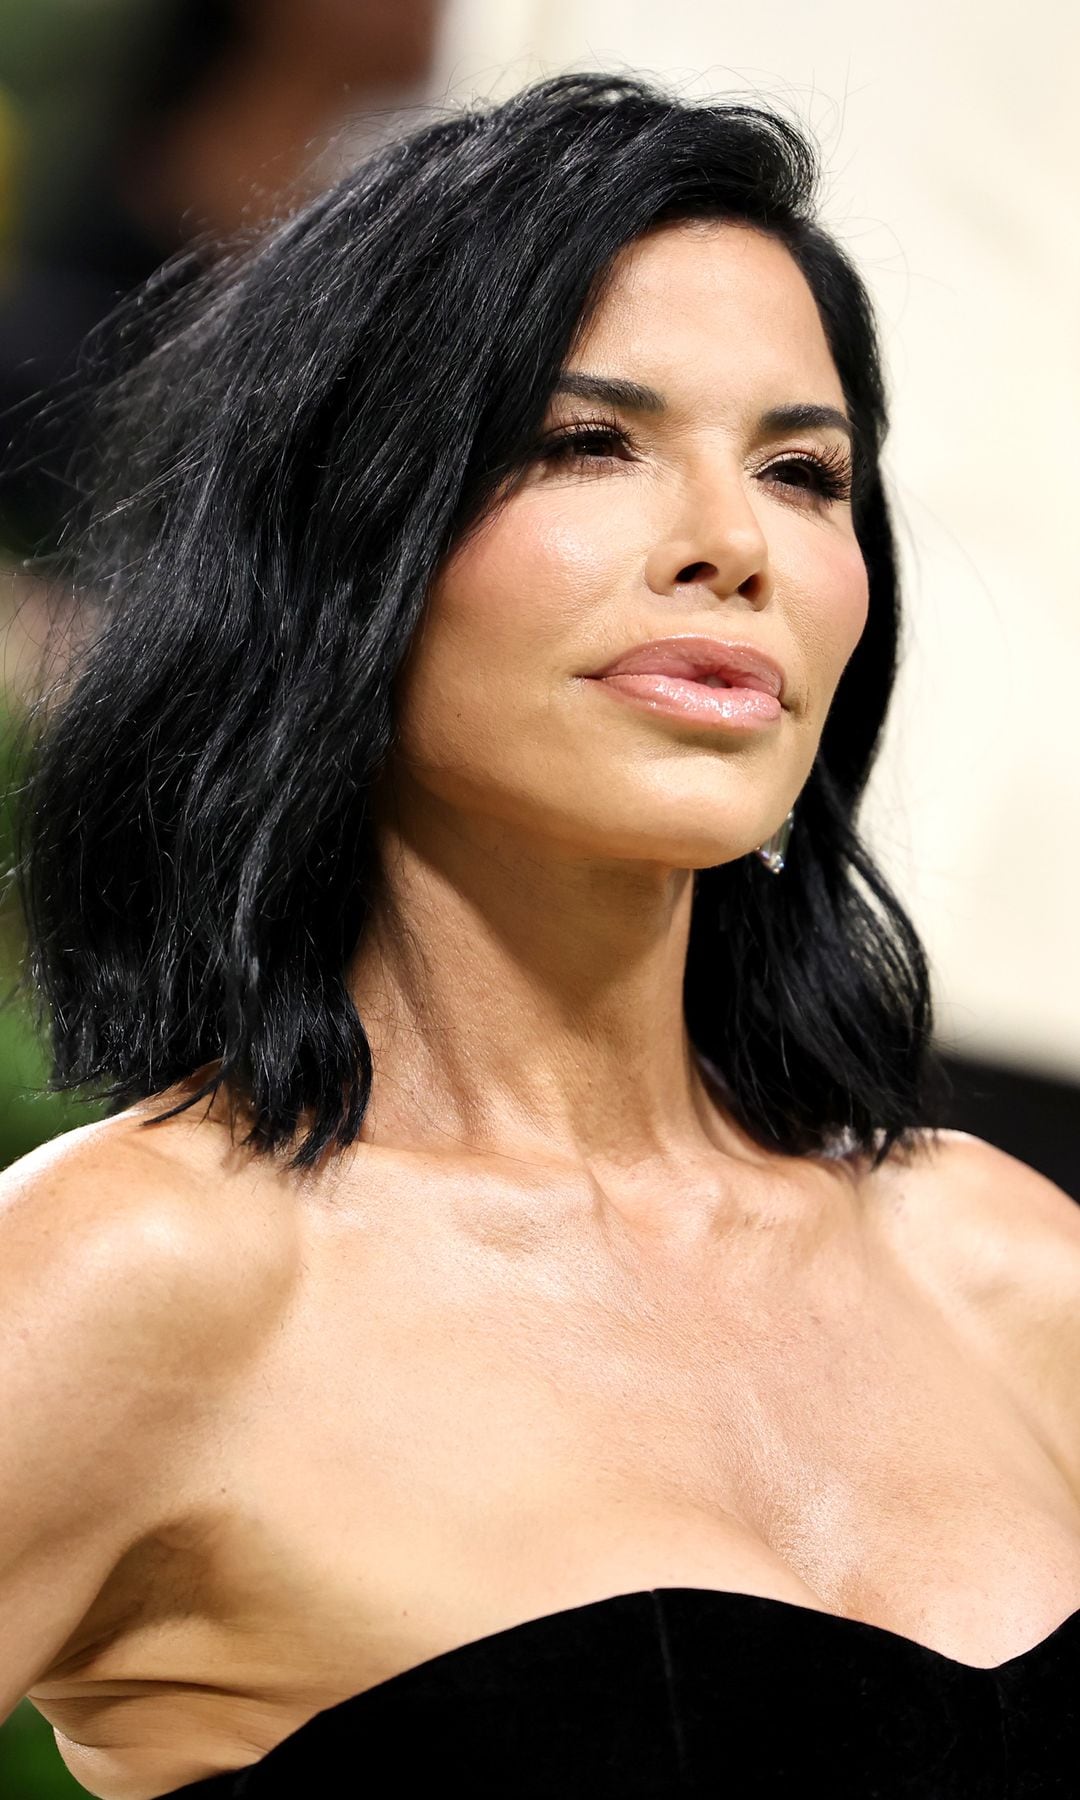 Lauren Sanchez shines in Schiaparelli's red nails dress, previously modeled by Kendall Jenner